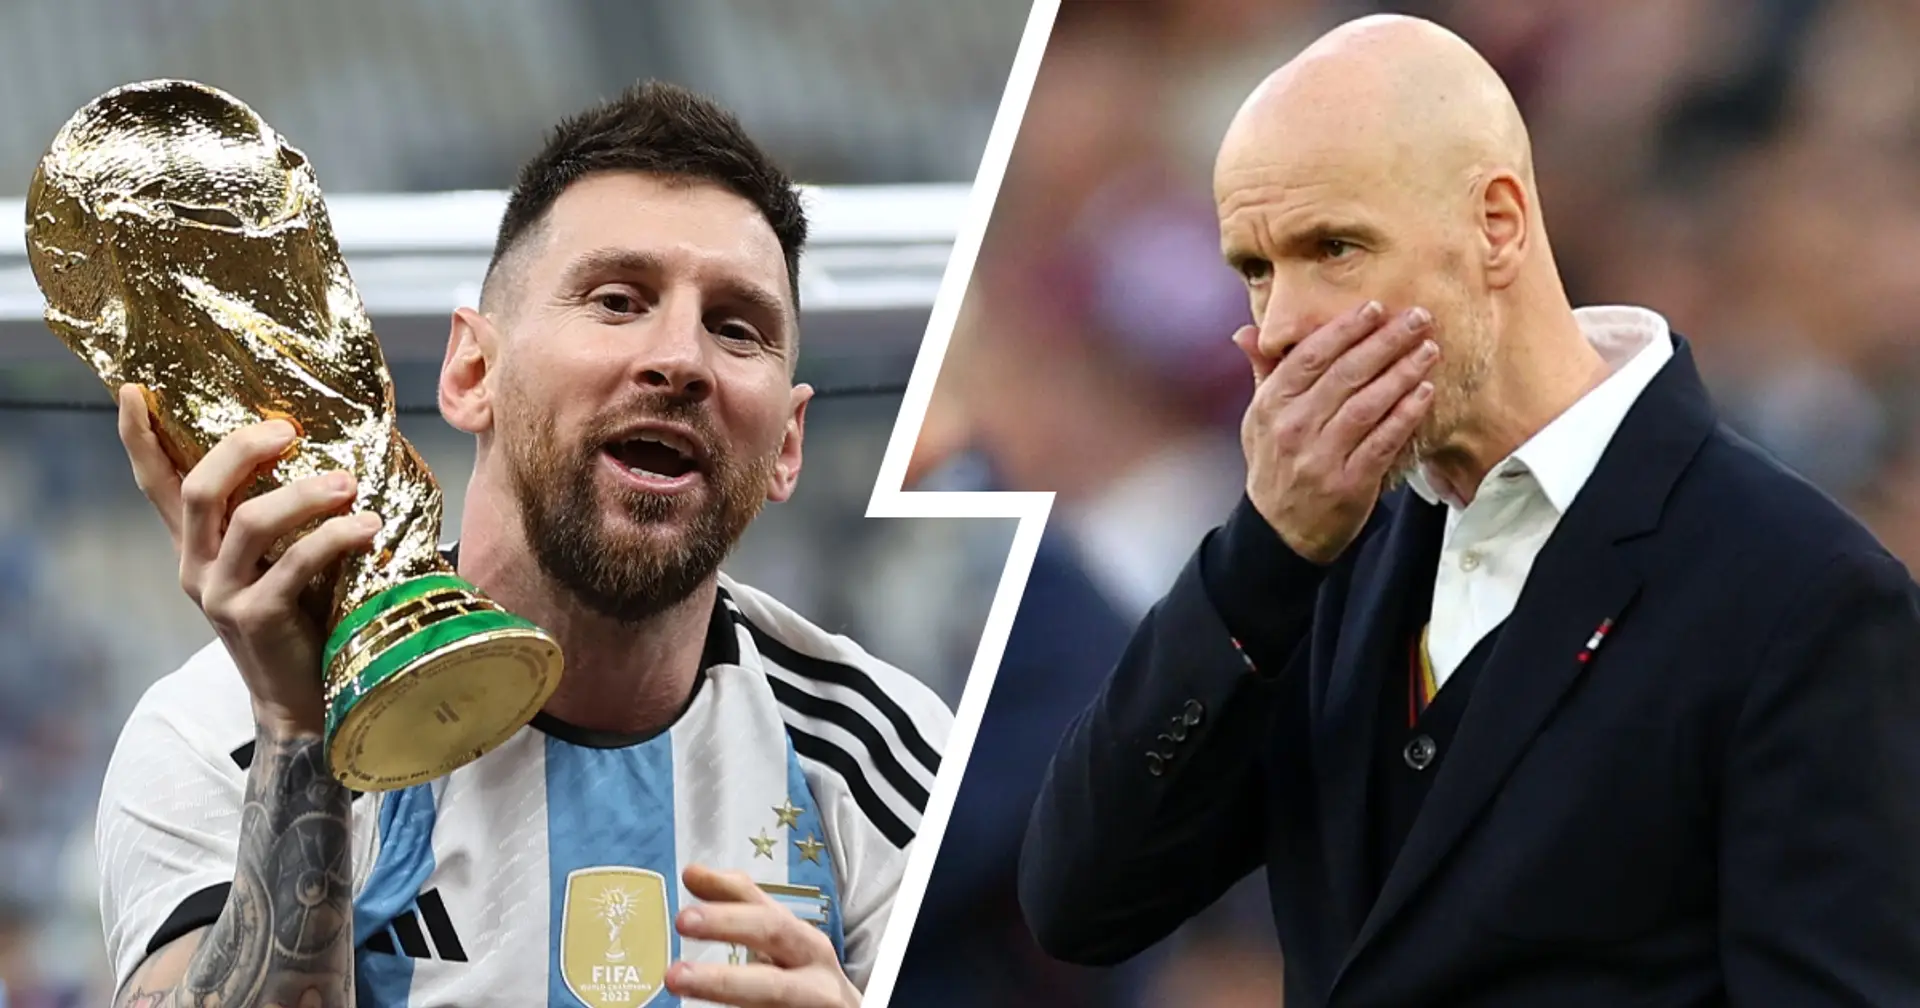 Explained: Man United's have behind-the-scenes theory about sudden drop in form — it has to do with the World Cup